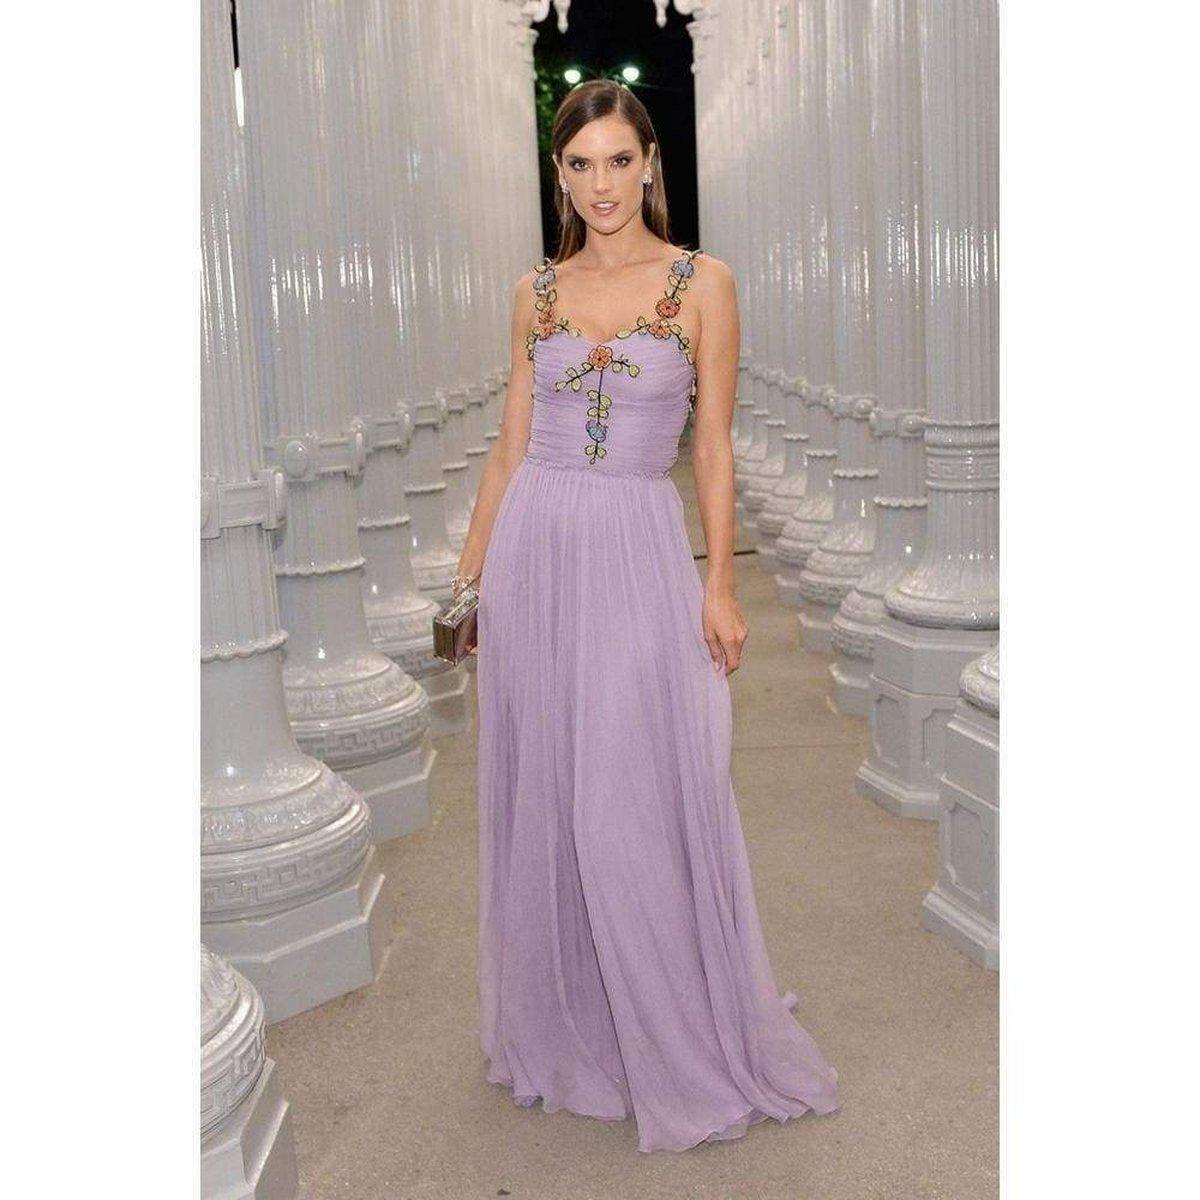 Follow us on Insta @runwaycatalog
A beautiful flowing chiffon gown with a multilayer skirt that gathers at the waist. 
The top is decorated with vine and flower appliqués that adds an ethereal dimension to the gown. 
Pale lavender chiffon crepe.